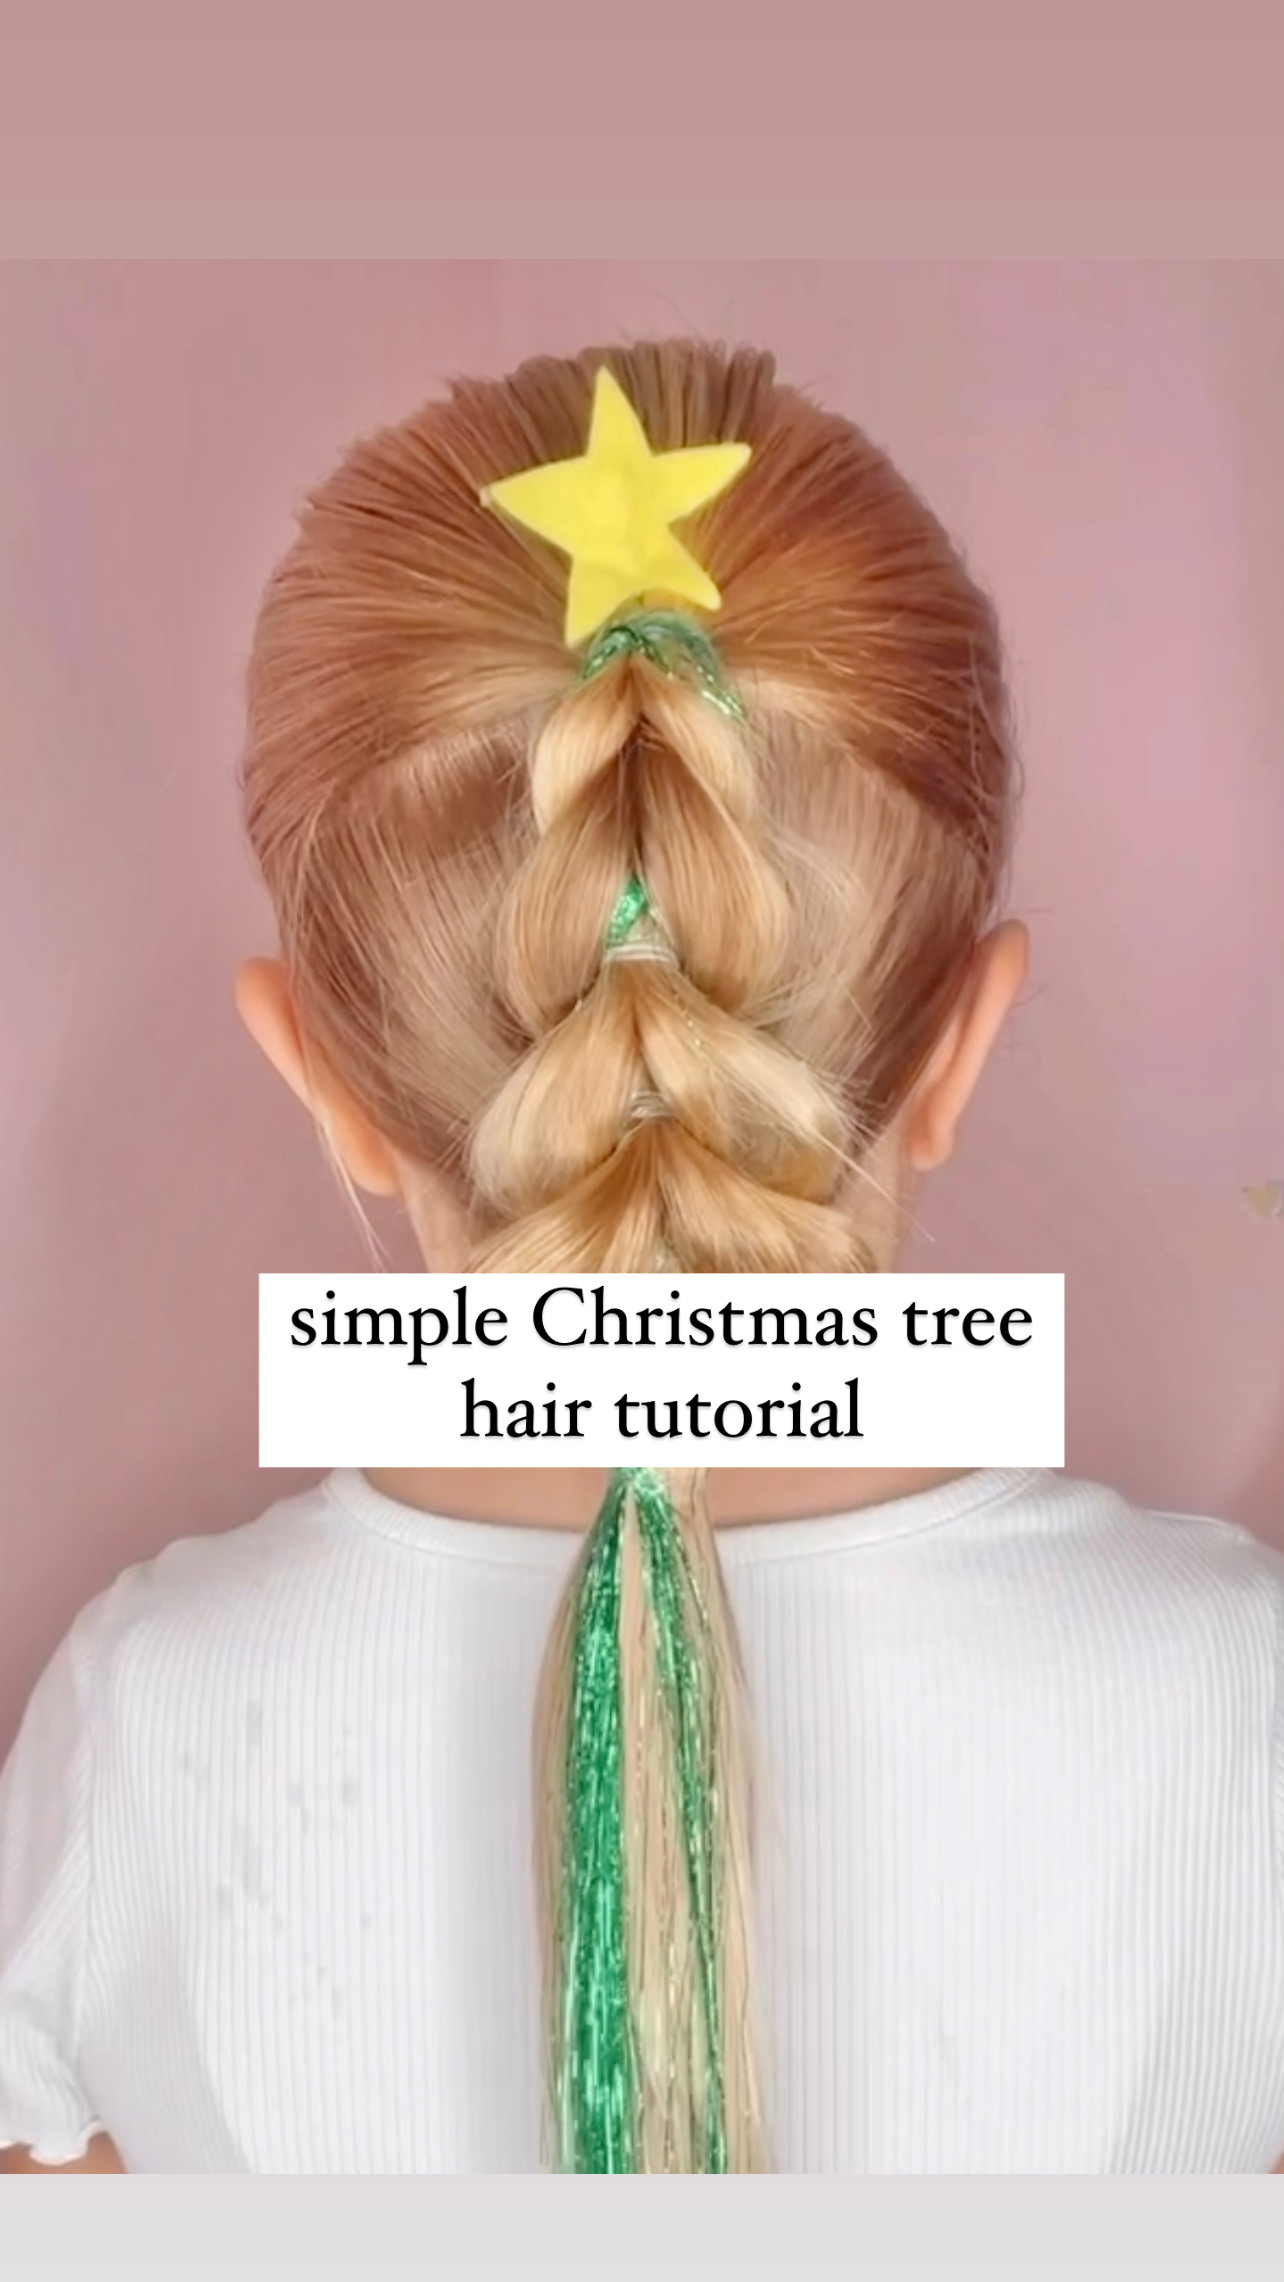 HOW TO TIE HAIR TINSEL // Step By Step Hair Tinsel Tutorial for